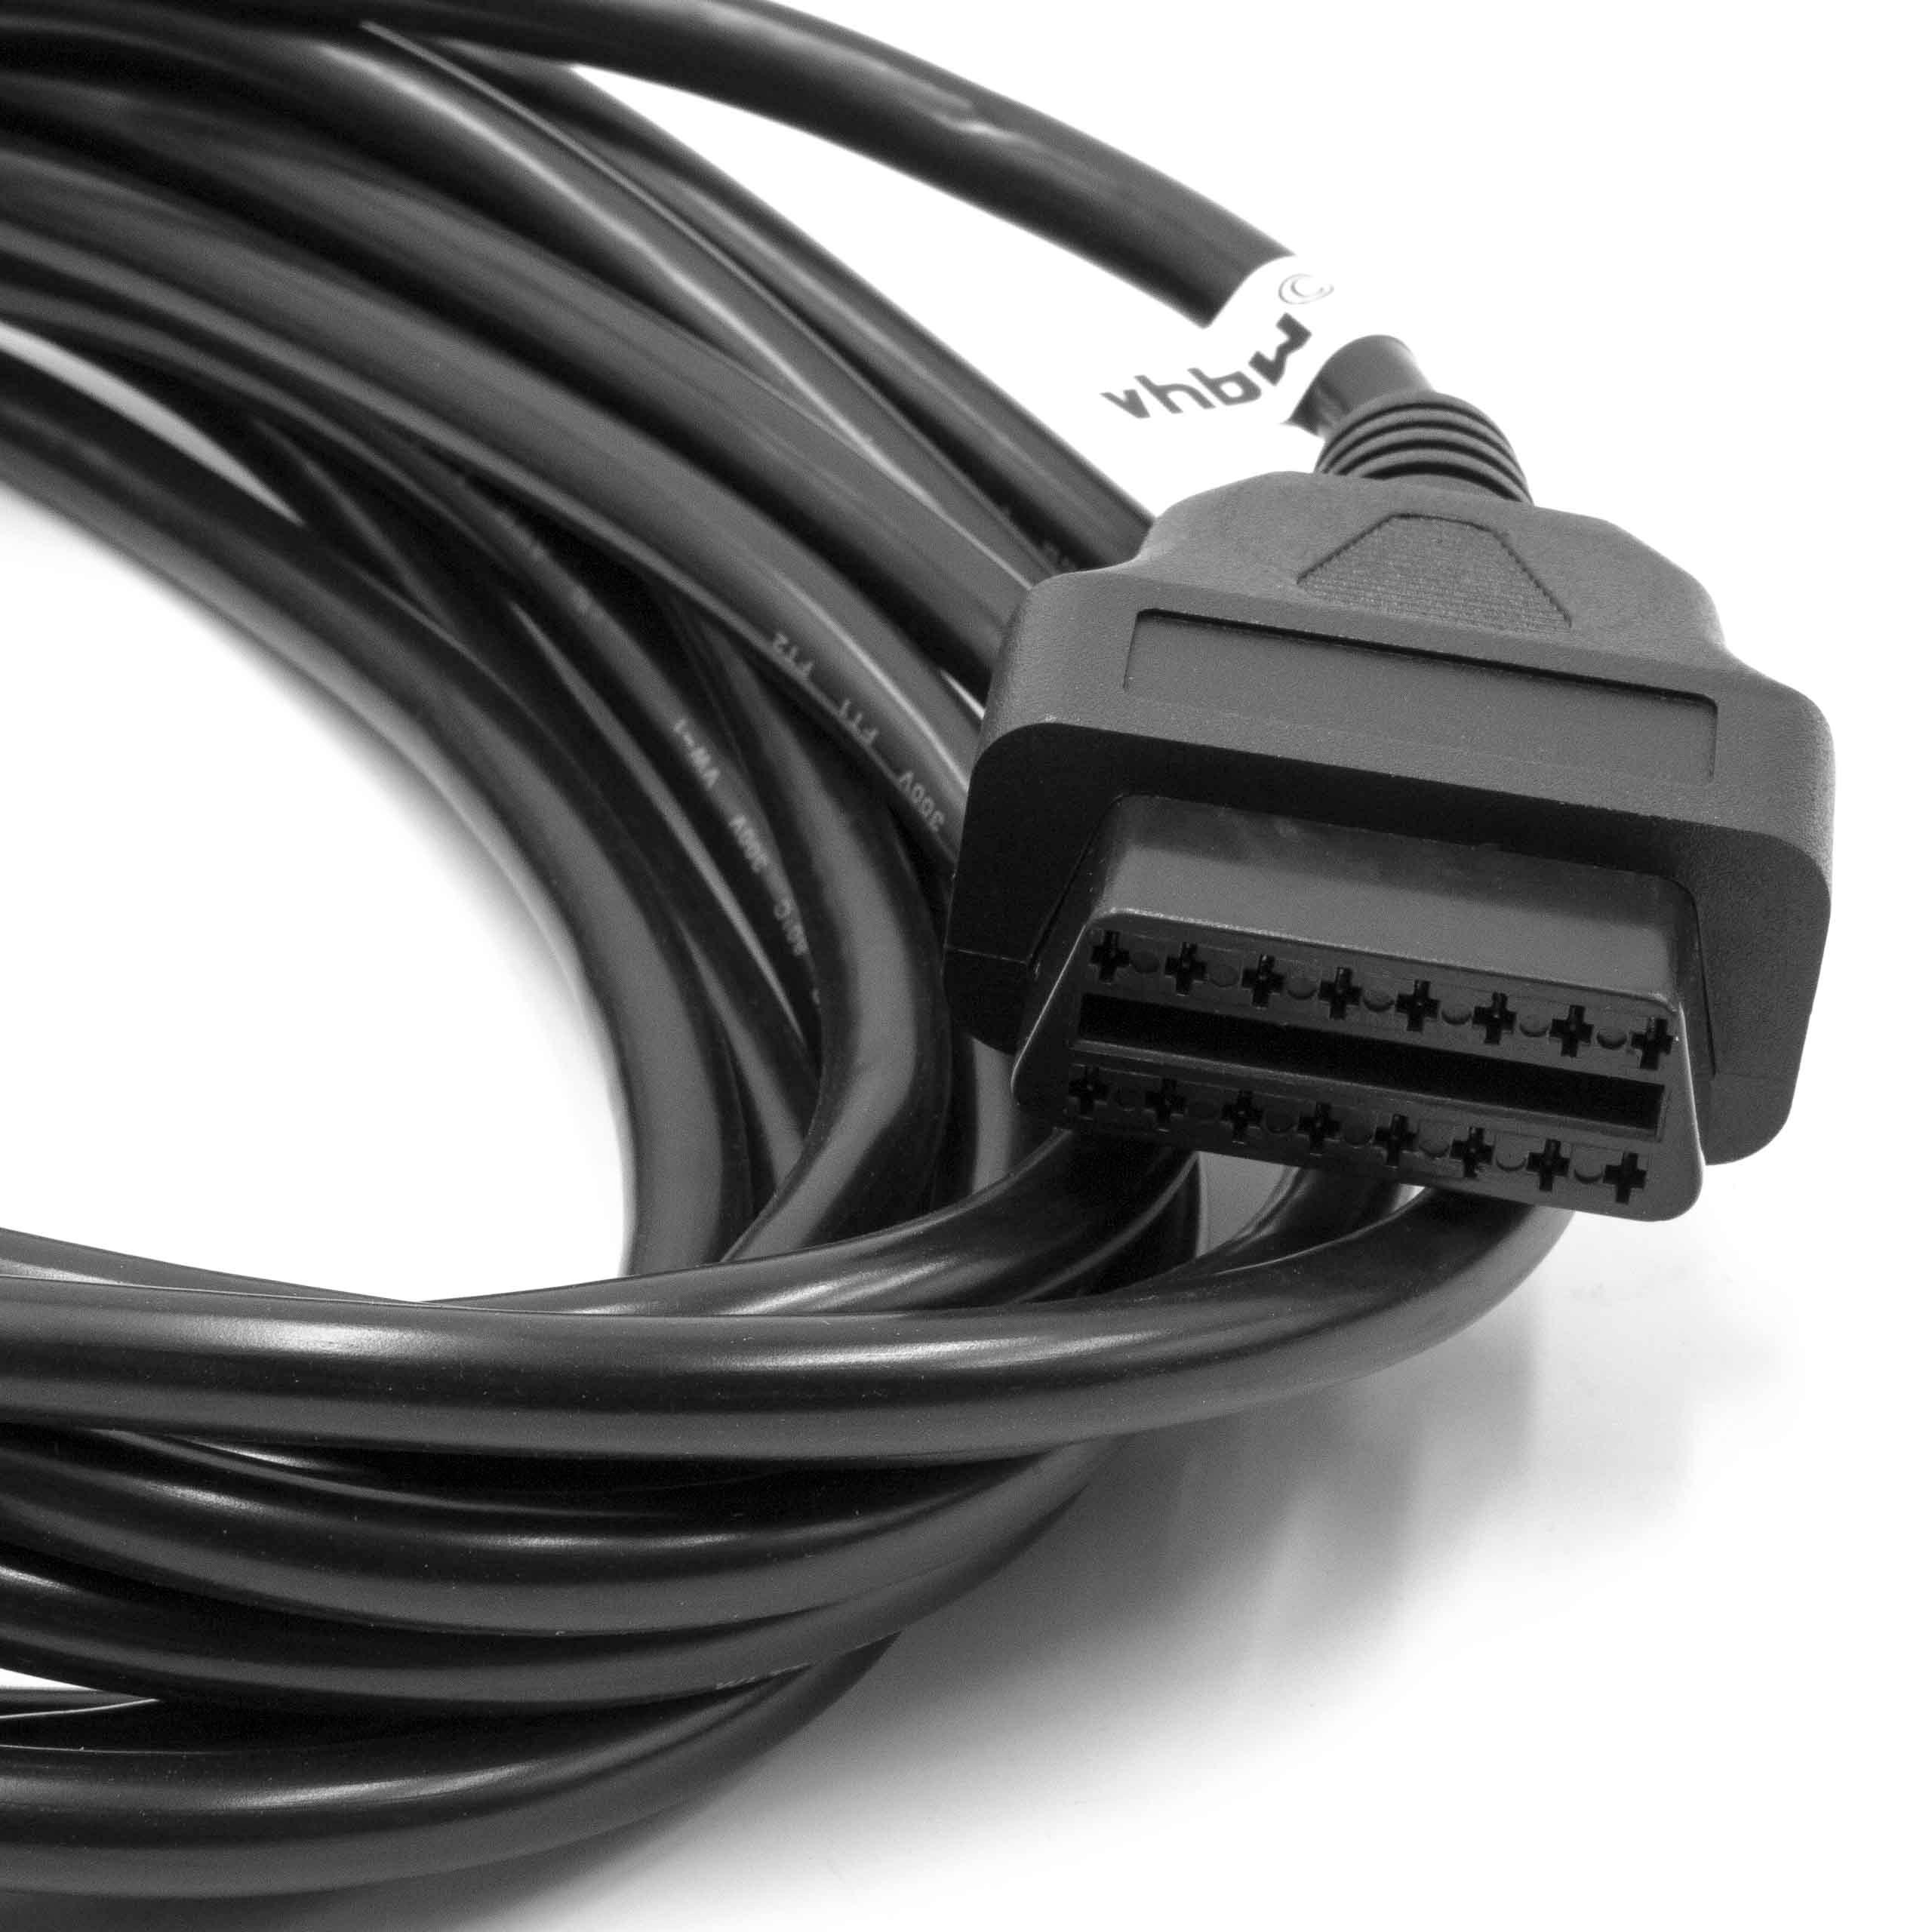 vhbw OBD2 Extension Cable 16 Pin (f) to 16 Pin (m) for Vehicle - 500 cm